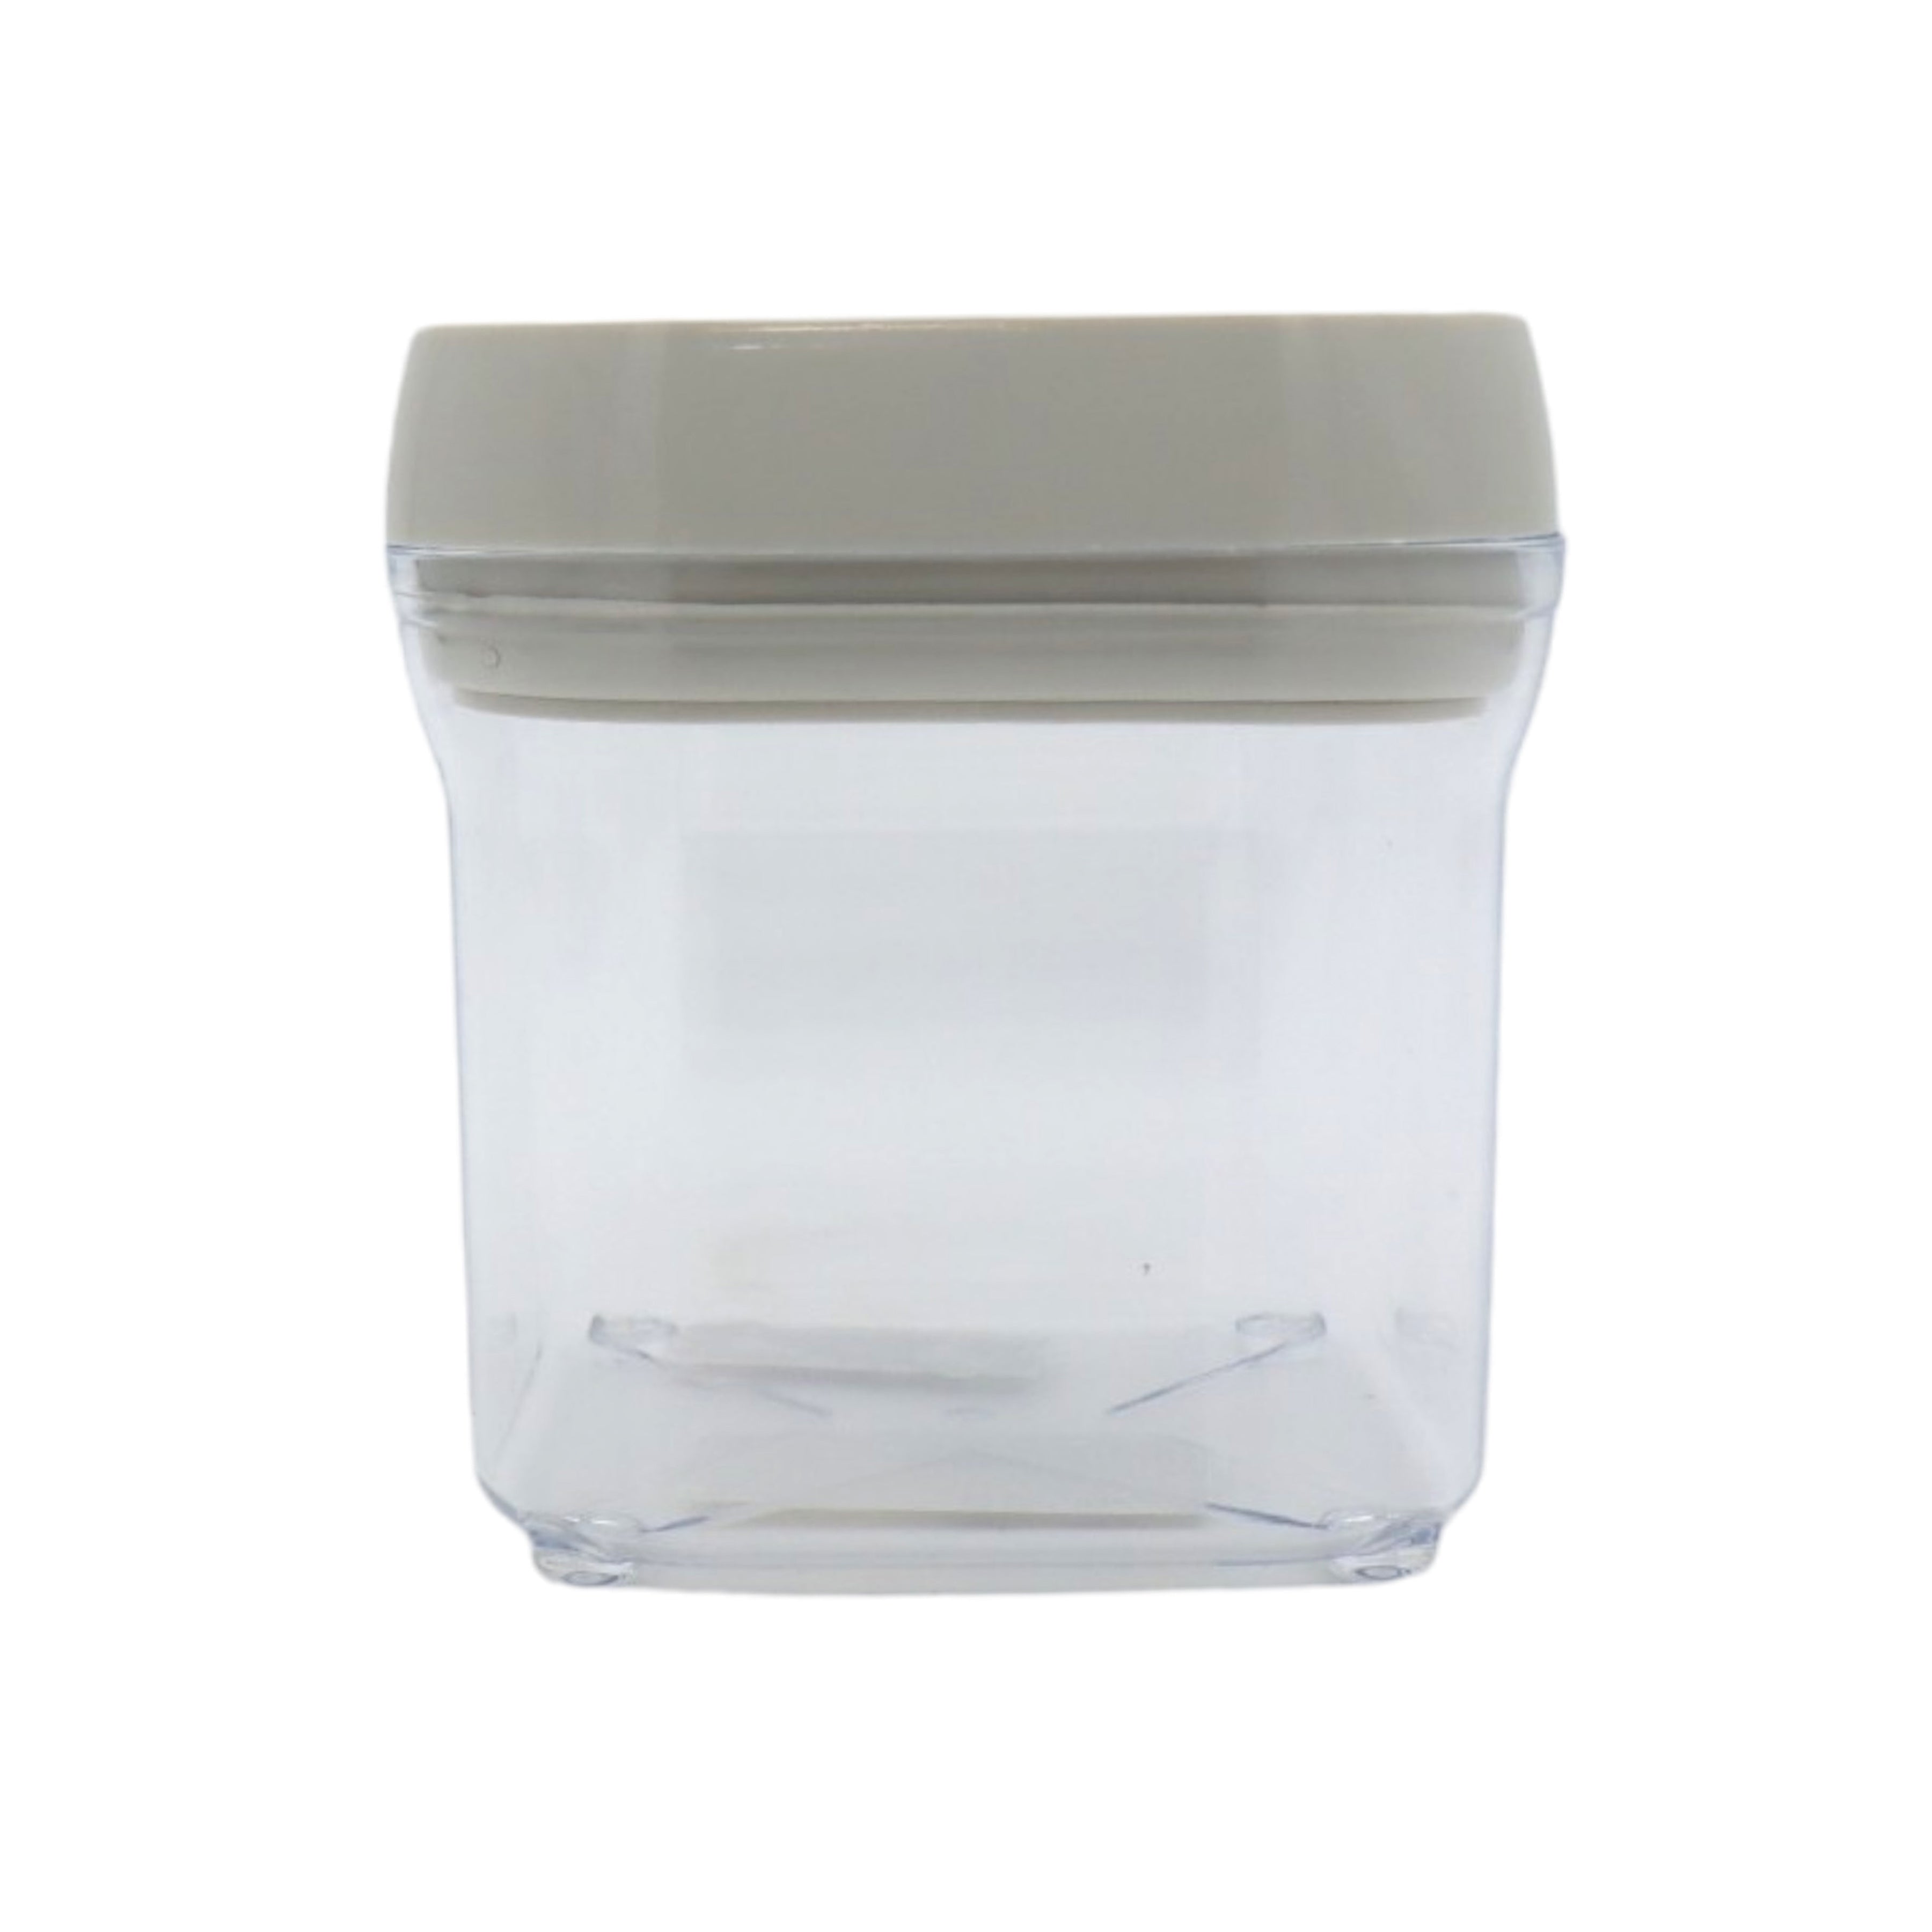 700ml Nu Ware Plastic Storage Canister Square